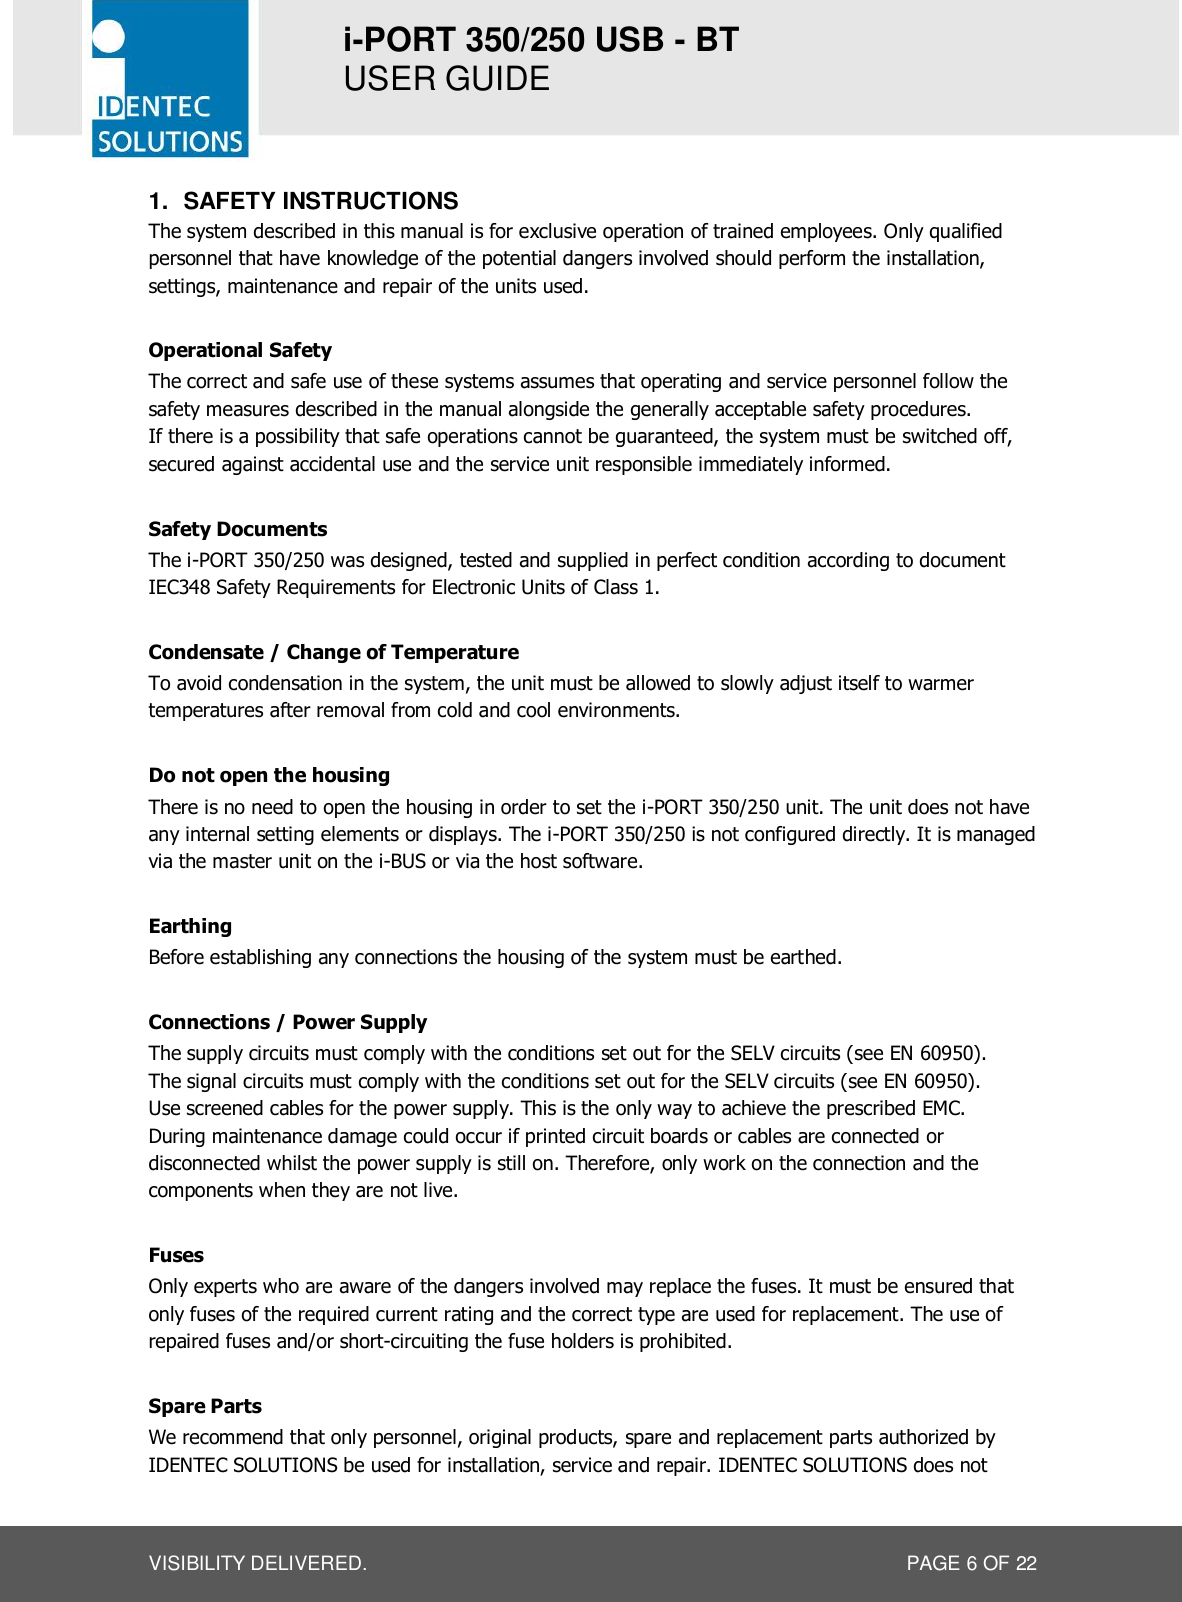 i-PORT 350/250 USB - BT  USER GUIDE  VISIBILITY DELIVERED.  PAGE 6 OF 22 1.  SAFETY INSTRUCTIONS The system described in this manual is for exclusive operation of trained employees. Only qualified personnel that have knowledge of the potential dangers involved should perform the installation, settings, maintenance and repair of the units used.  Operational Safety The correct and safe use of these systems assumes that operating and service personnel follow the safety measures described in the manual alongside the generally acceptable safety procedures. If there is a possibility that safe operations cannot be guaranteed, the system must be switched off, secured against accidental use and the service unit responsible immediately informed.  Safety Documents The i-PORT 350/250 was designed, tested and supplied in perfect condition according to document IEC348 Safety Requirements for Electronic Units of Class 1.  Condensate / Change of Temperature To avoid condensation in the system, the unit must be allowed to slowly adjust itself to warmer temperatures after removal from cold and cool environments.   Do not open the housing There is no need to open the housing in order to set the i-PORT 350/250 unit. The unit does not have any internal setting elements or displays. The i-PORT 350/250 is not configured directly. It is managed via the master unit on the i-BUS or via the host software.  Earthing Before establishing any connections the housing of the system must be earthed.  Connections / Power Supply The supply circuits must comply with the conditions set out for the SELV circuits (see EN 60950). The signal circuits must comply with the conditions set out for the SELV circuits (see EN 60950). Use screened cables for the power supply. This is the only way to achieve the prescribed EMC. During maintenance damage could occur if printed circuit boards or cables are connected or disconnected whilst the power supply is still on. Therefore, only work on the connection and the components when they are not live.  Fuses Only experts who are aware of the dangers involved may replace the fuses. It must be ensured that only fuses of the required current rating and the correct type are used for replacement. The use of repaired fuses and/or short-circuiting the fuse holders is prohibited.  Spare Parts We recommend that only personnel, original products, spare and replacement parts authorized by IDENTEC SOLUTIONS be used for installation, service and repair. IDENTEC SOLUTIONS does not 